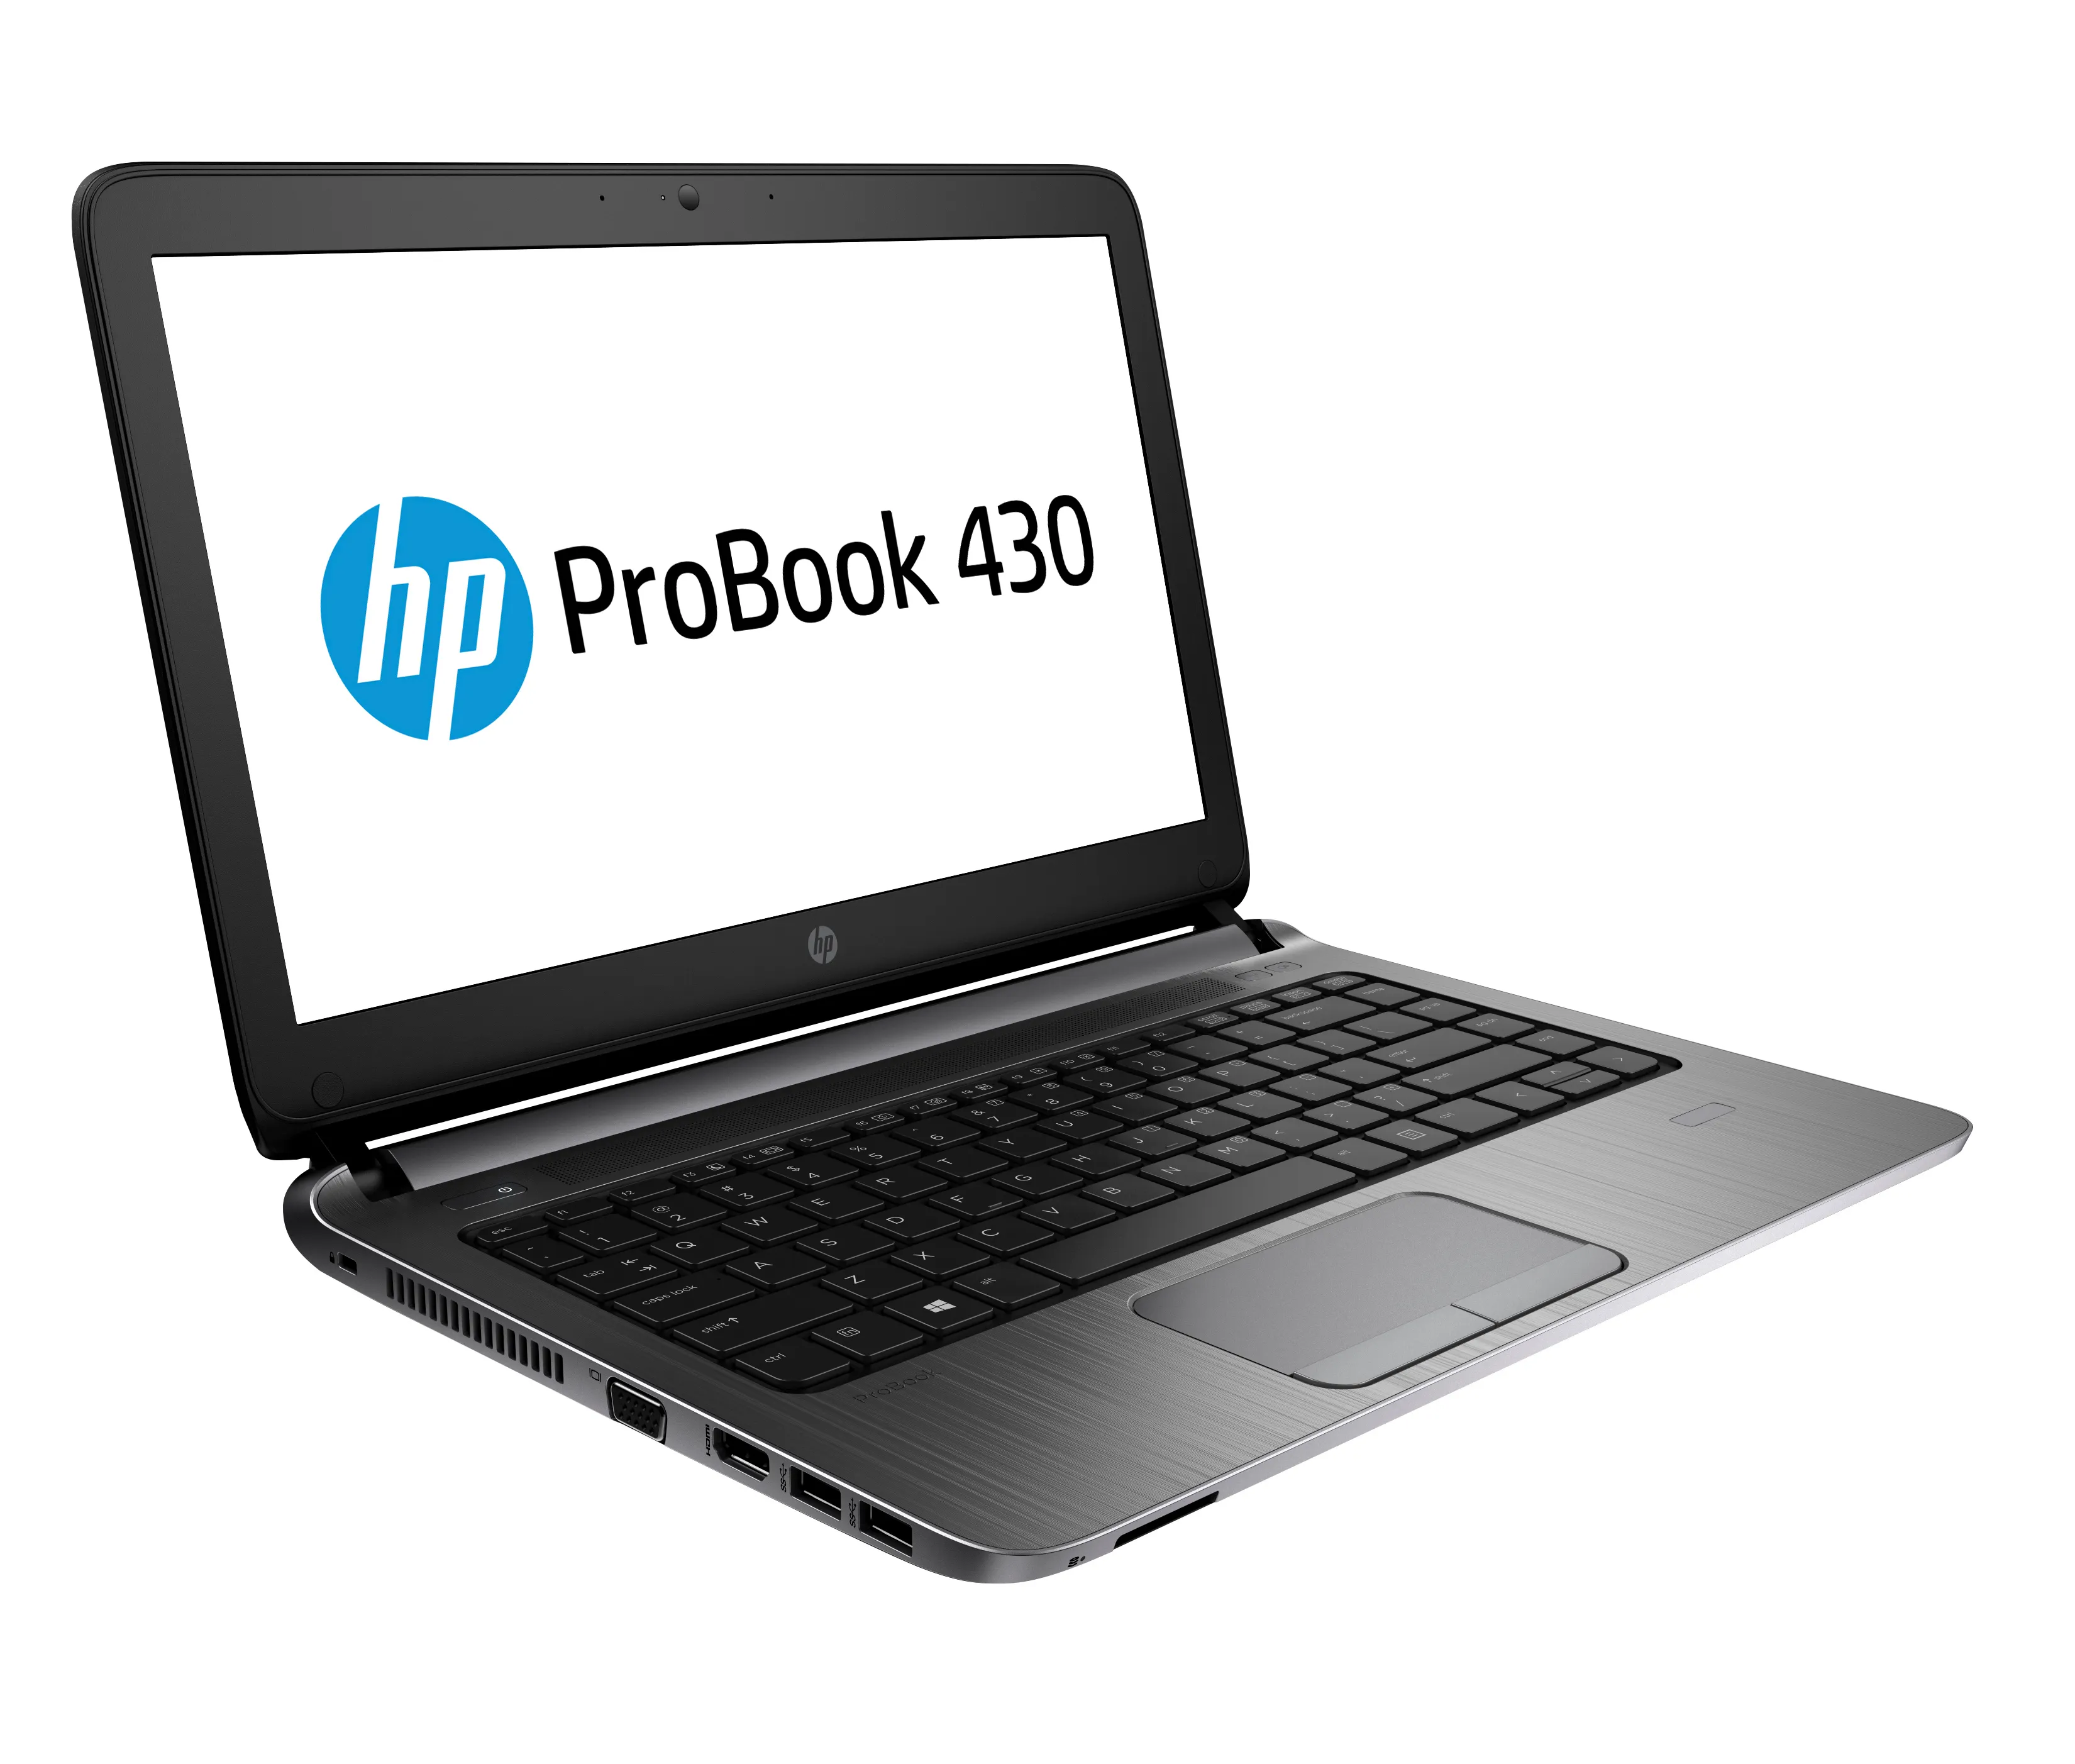 Sale HP 430 G1 Used Laptops Core i5 4th Gen Win7 14-inch Second Hand Laptop Portable Business Computer Students